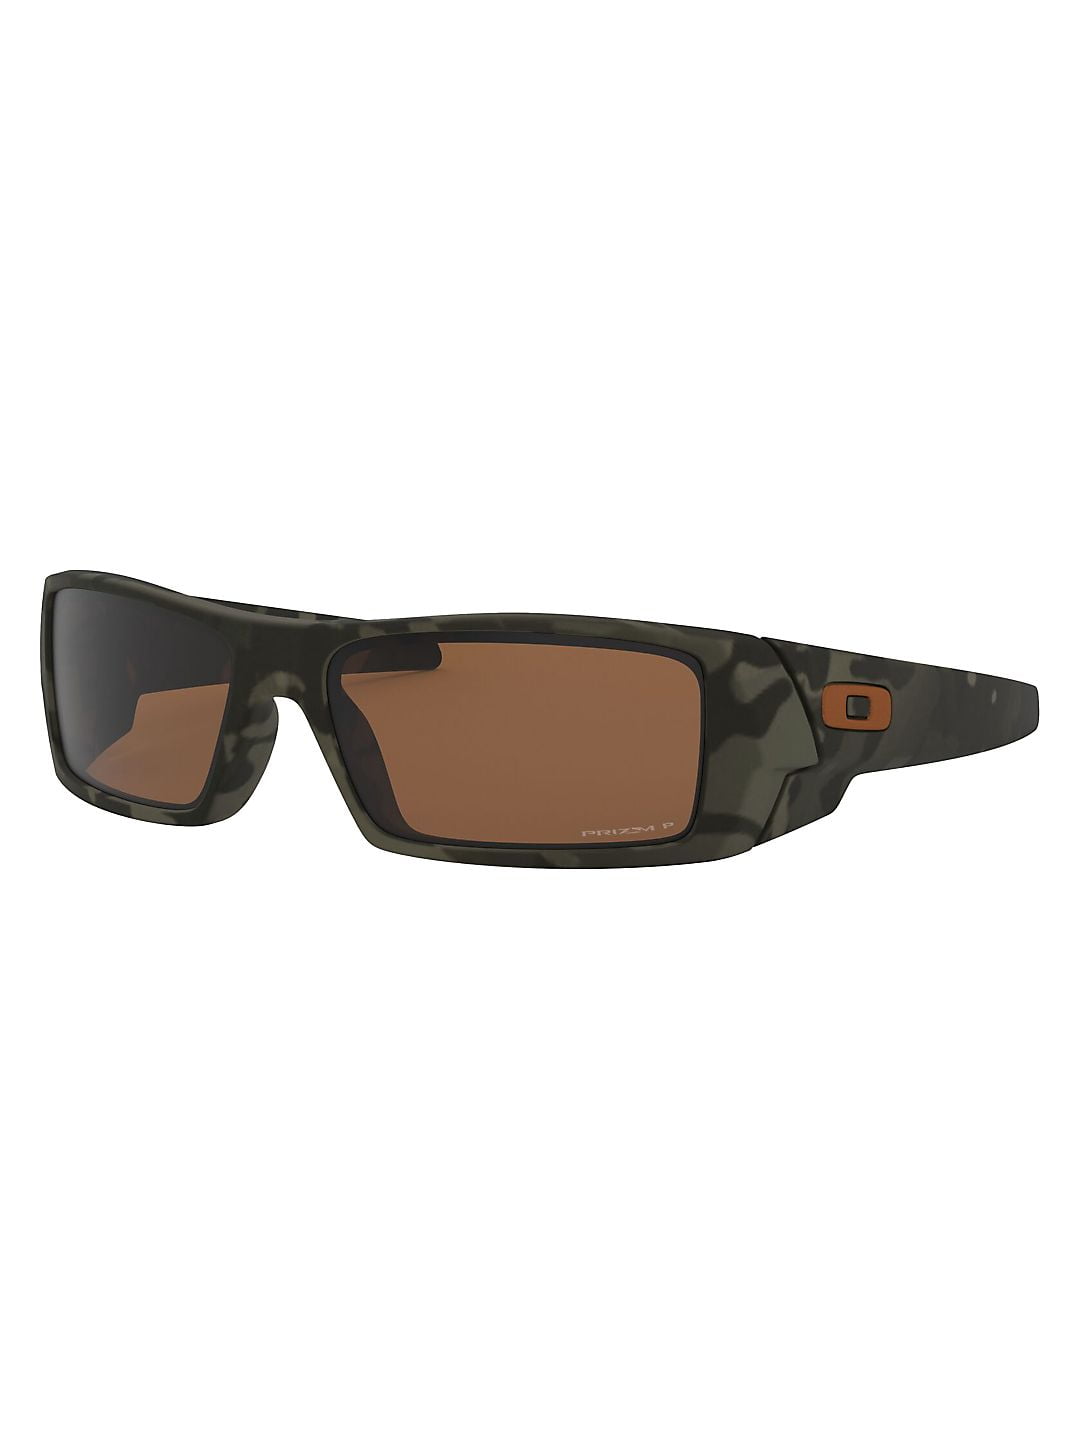 Oakley sunglasses OO9014 Gascan (51) matte olive camo with prizm tungsten  polarized lenses, 60mm